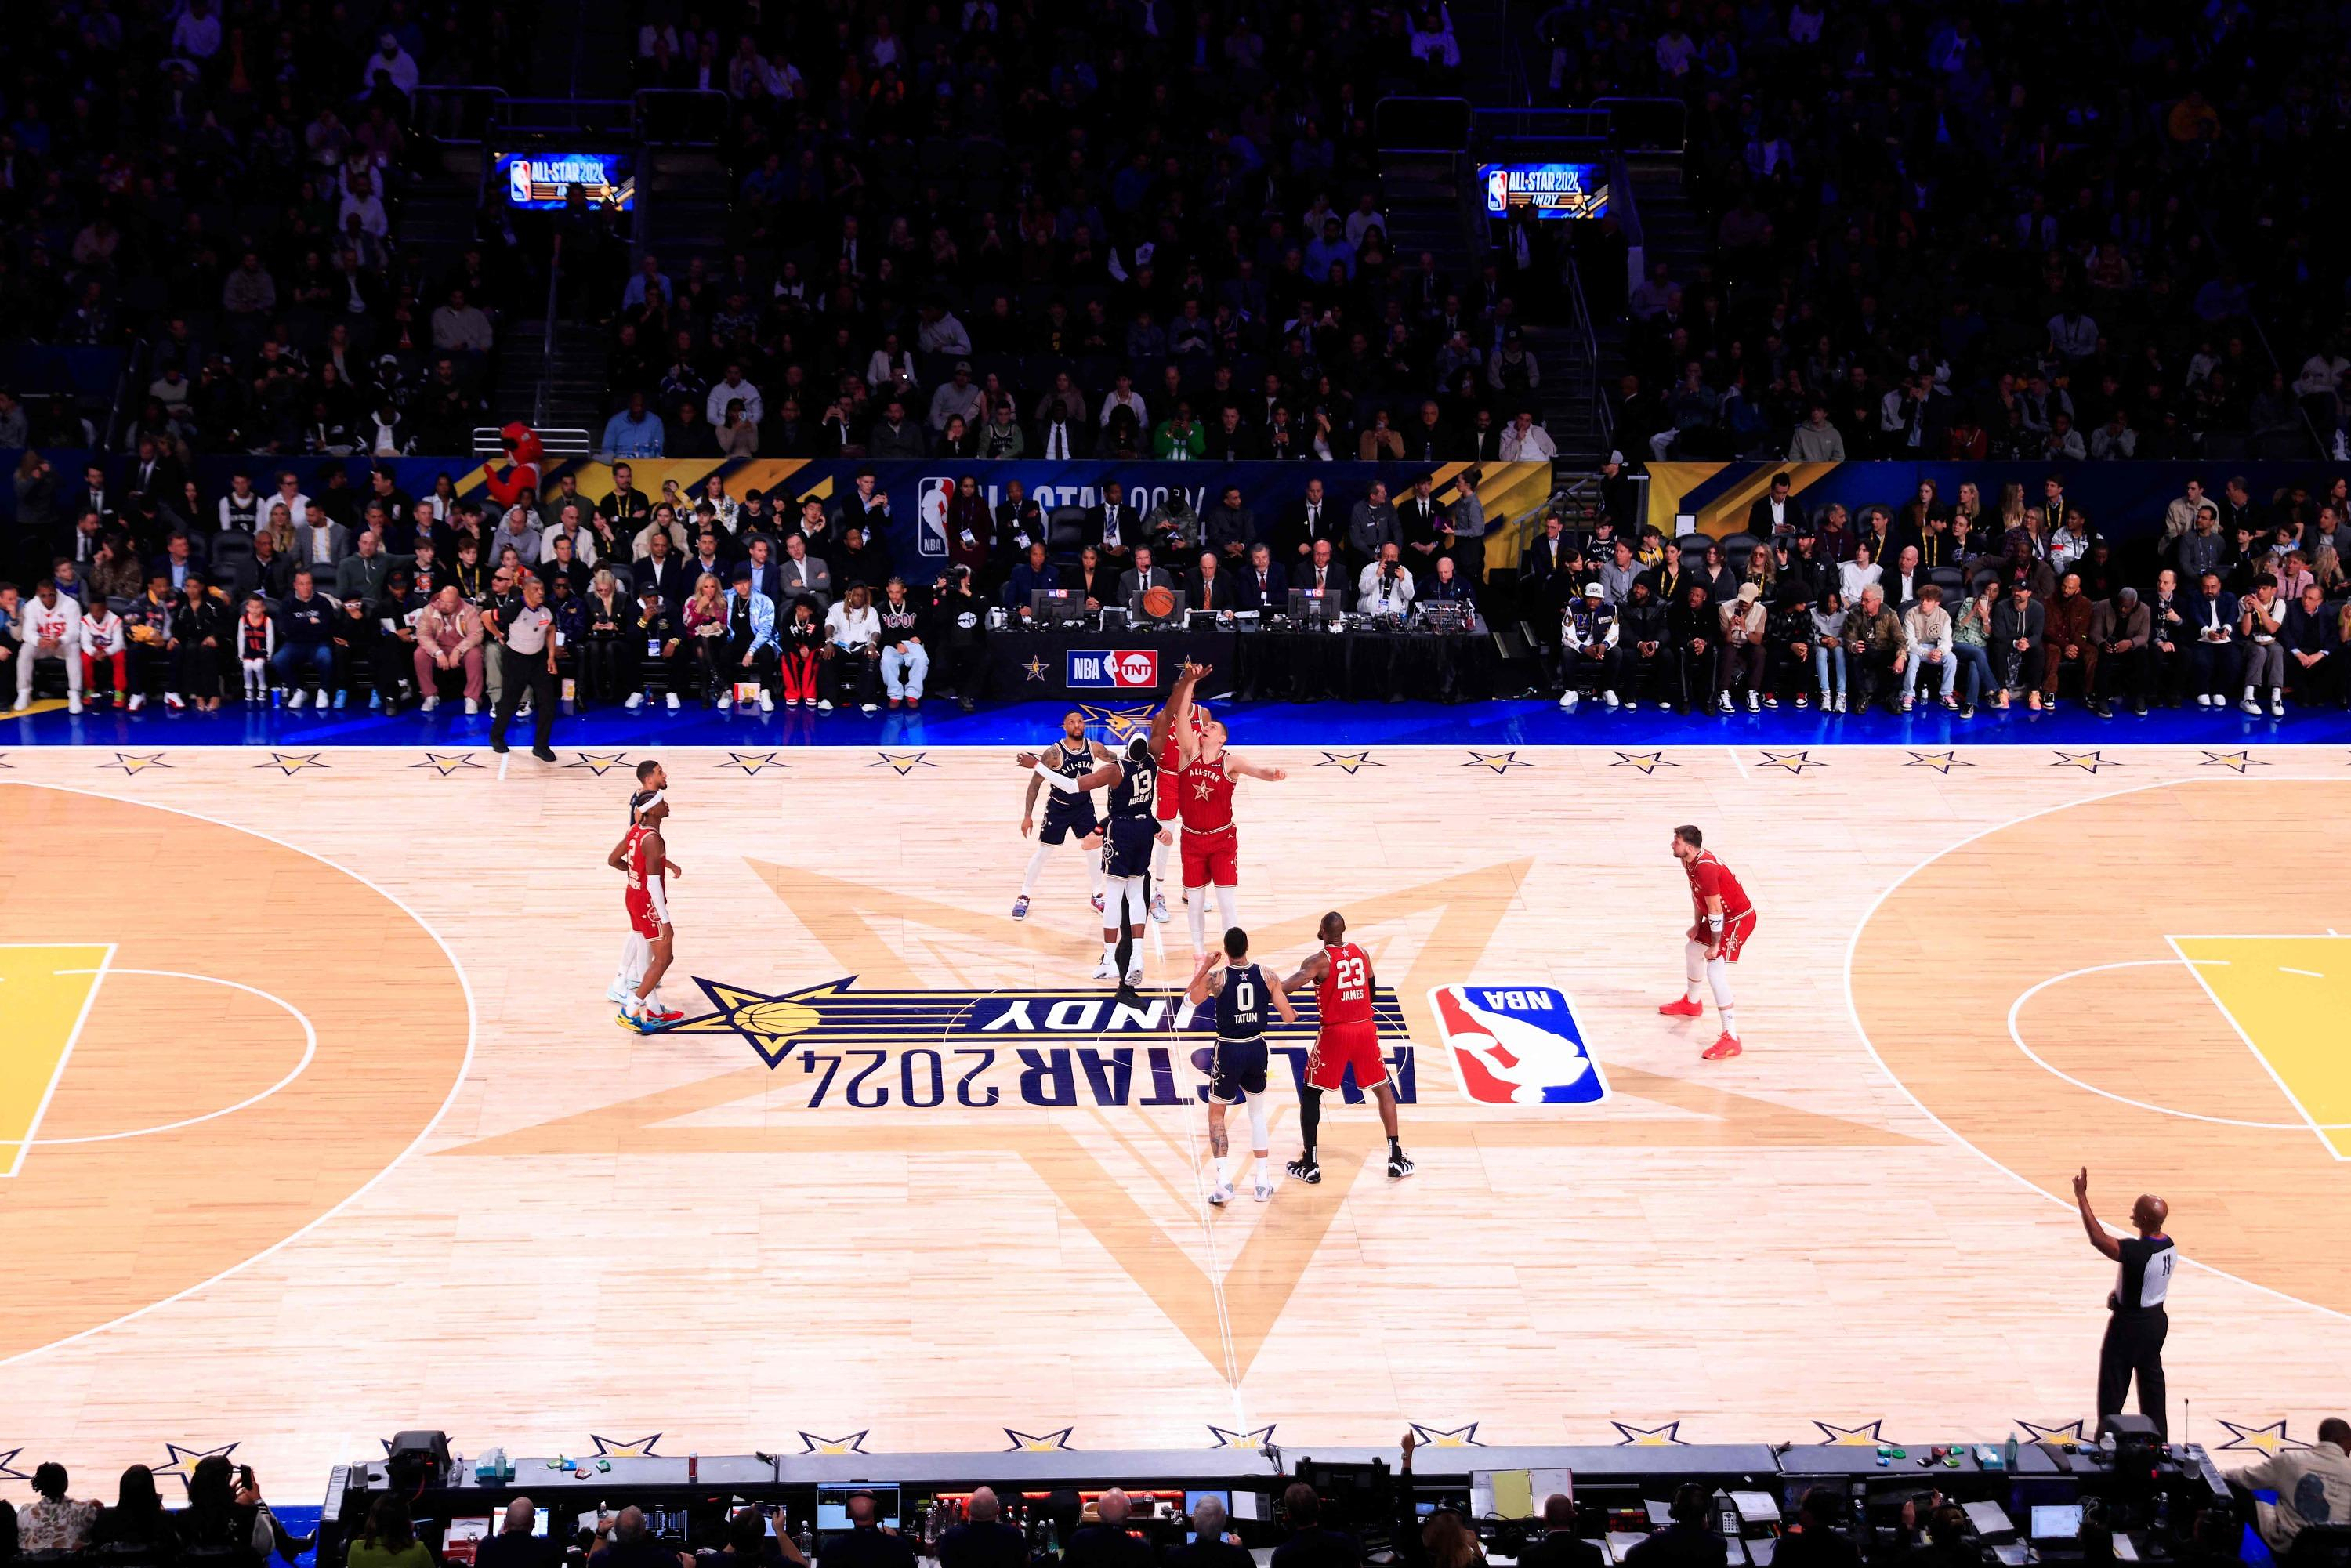 NBA All-Star Game: East defeats West in record-breaking...and boring game